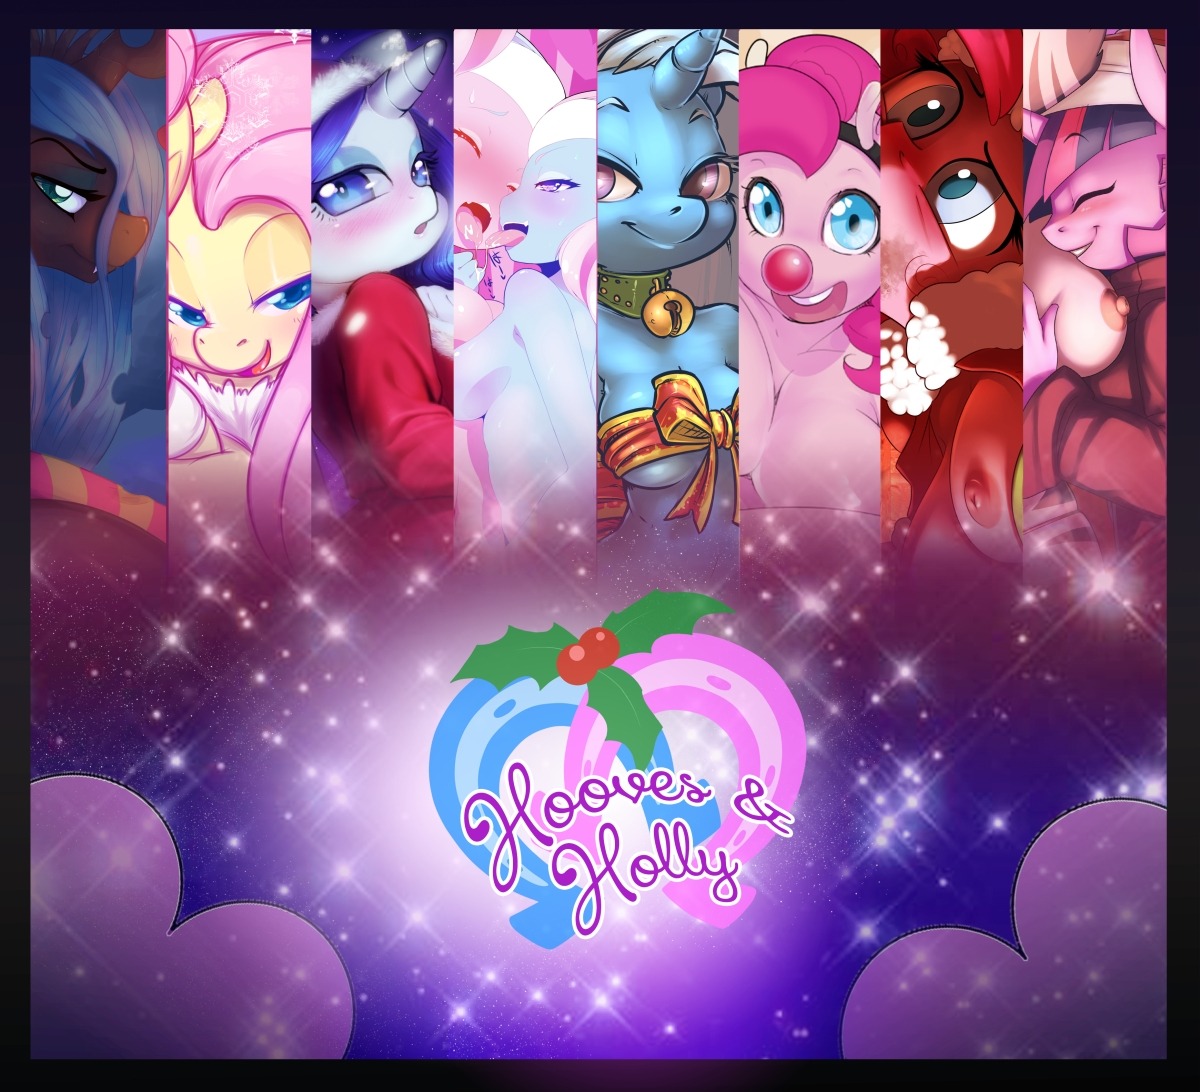 wintercloppack:  Presenting the Hooves and Holly art pack! Our Christmas gift to